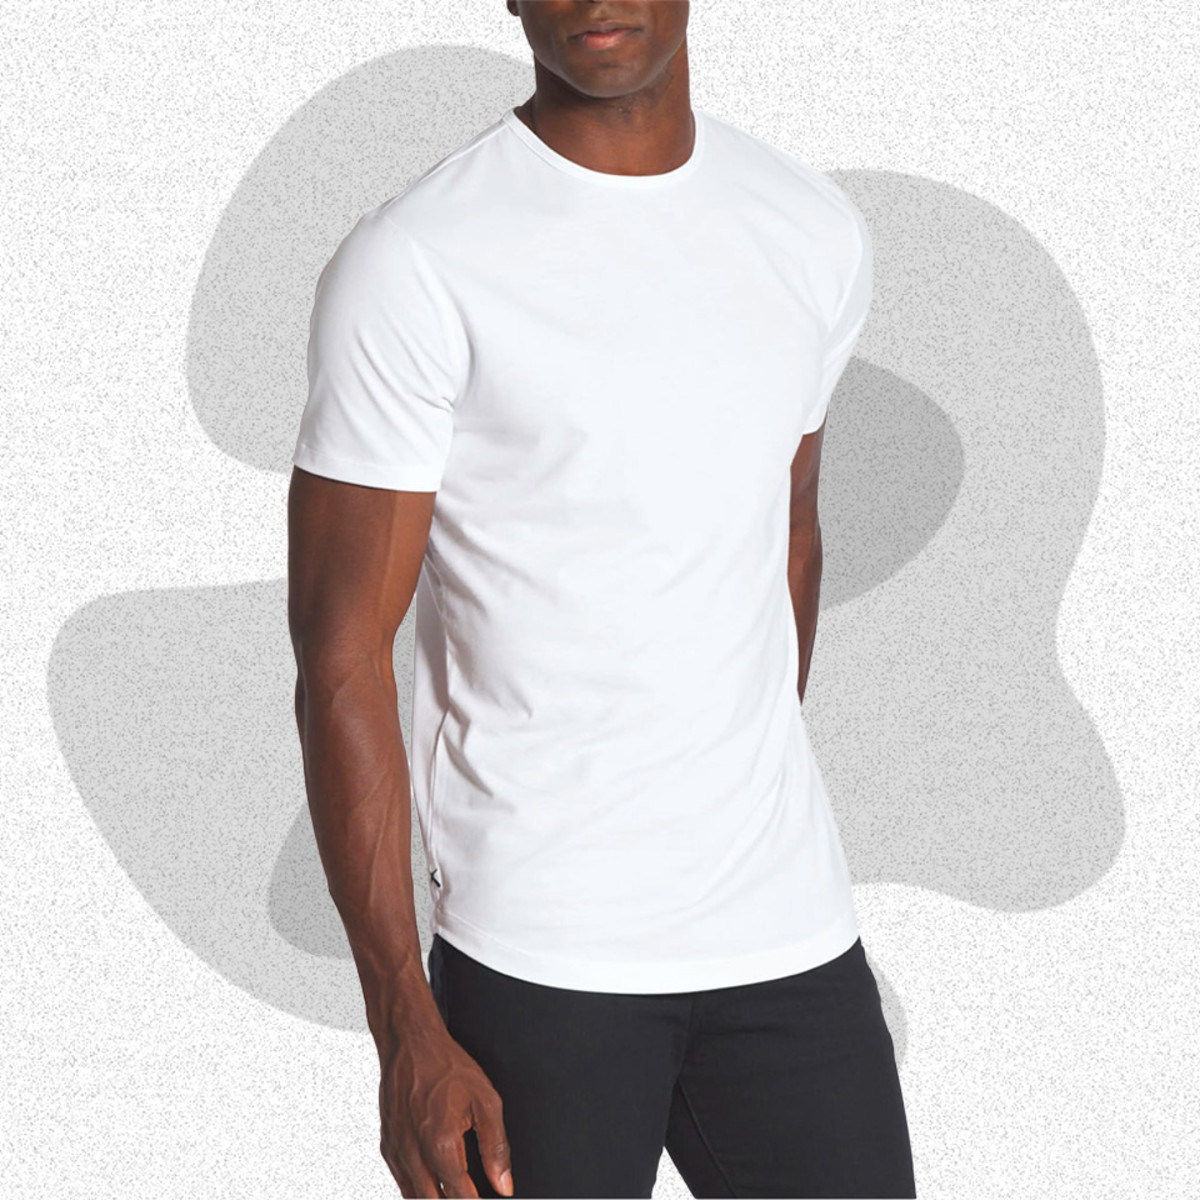 16 Best T-Shirts For Men – Every Fit and Style for 2023